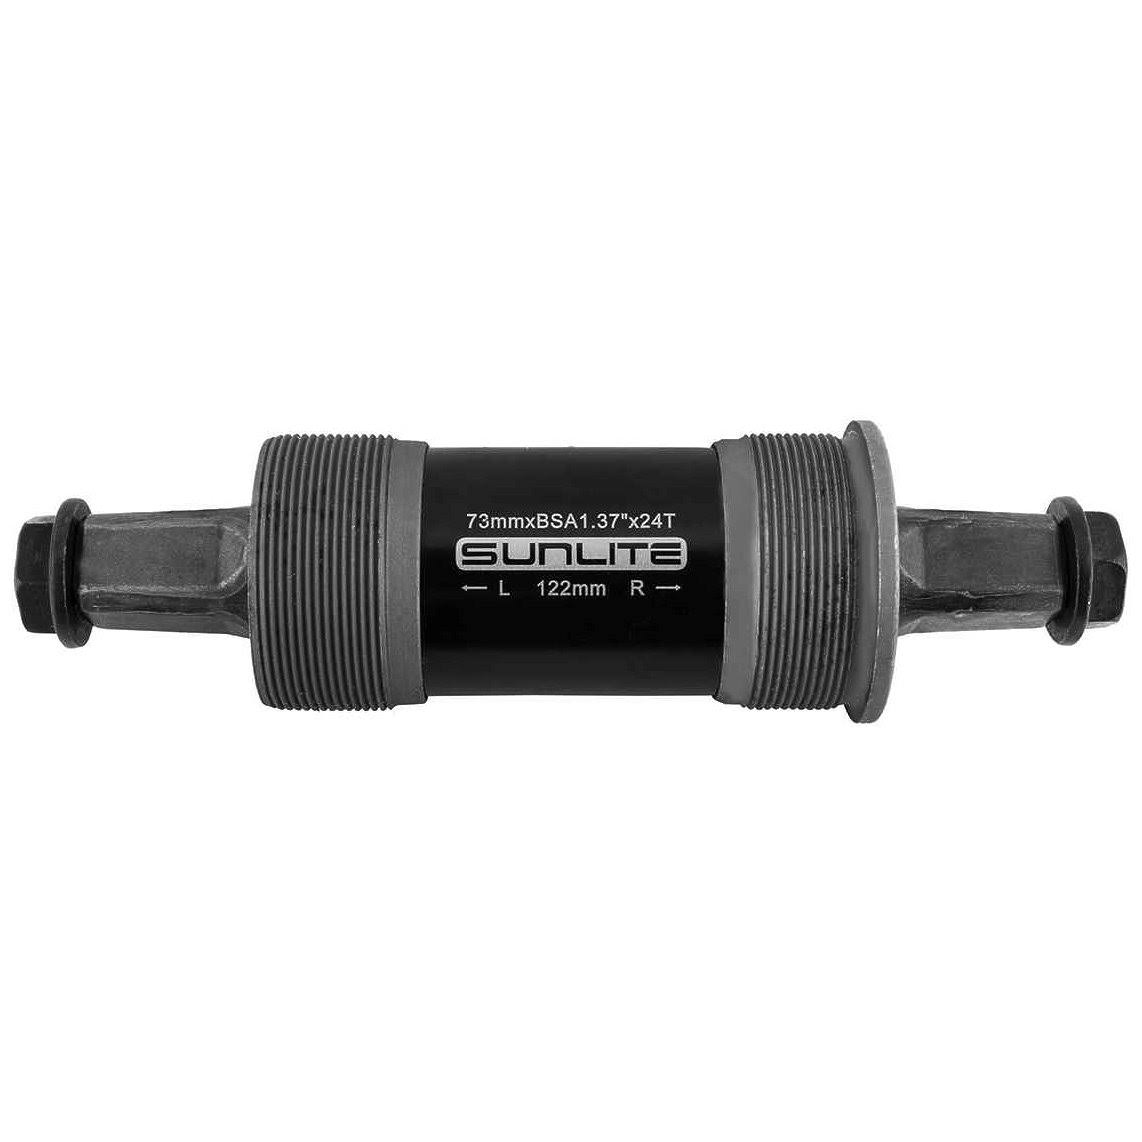 Sunlite Bottom Bracket Sl26 73x122 Square Steel Cup English Sealed Bearing | Sunlite | Bikes, Scooters & Ride-Ons